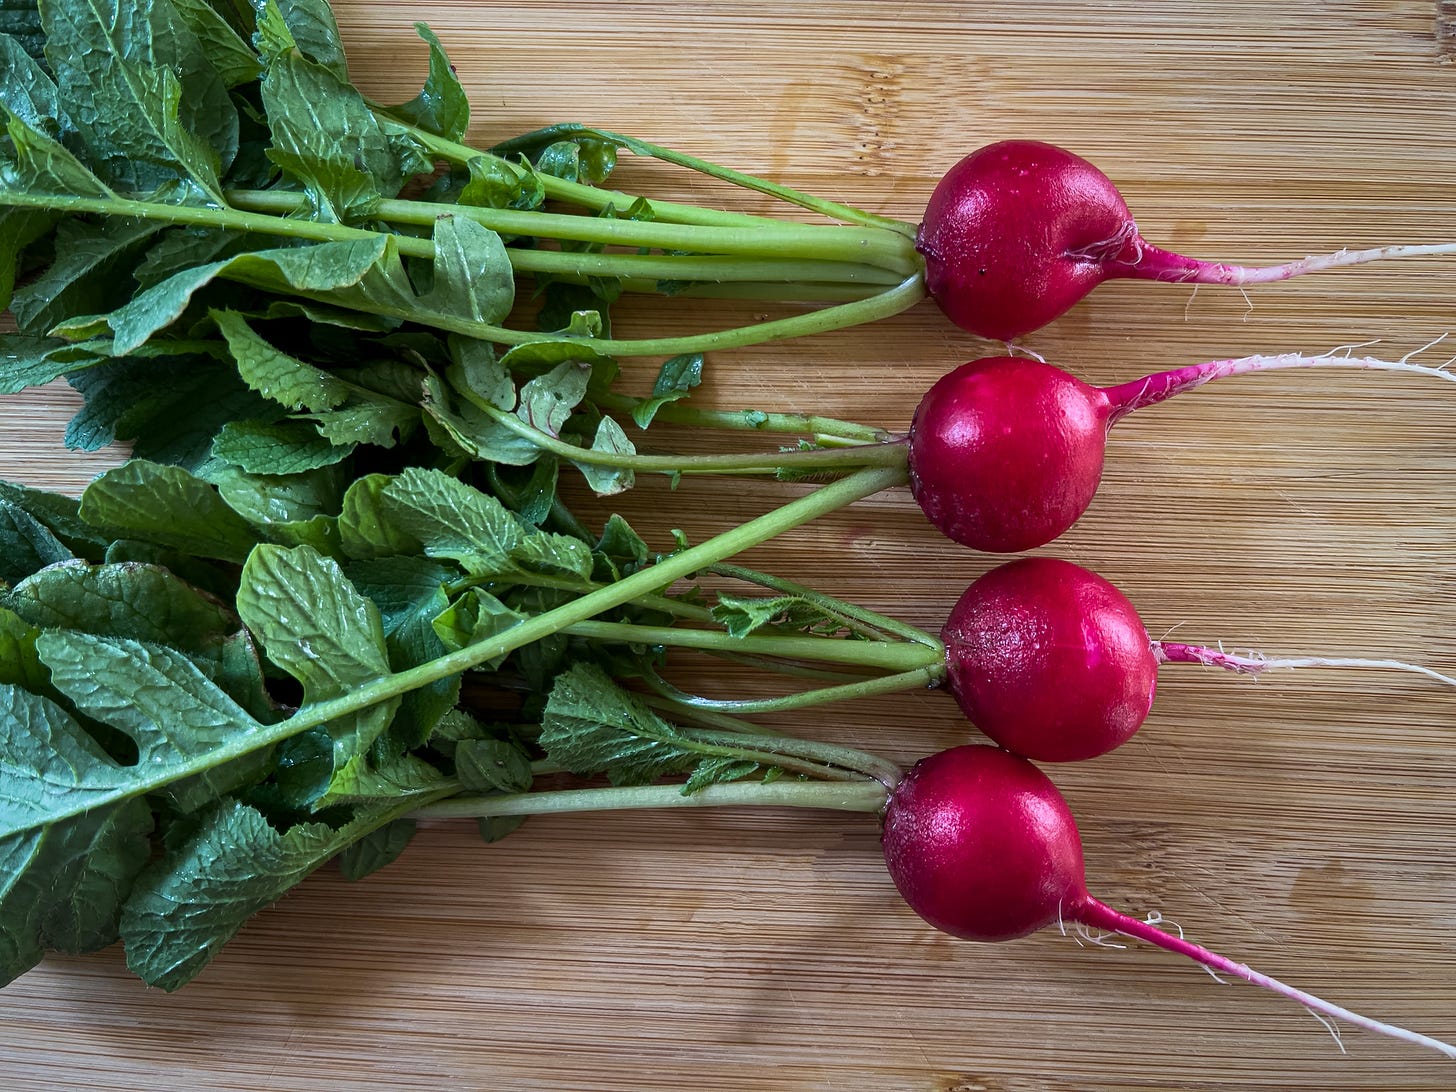 Four red radishes with their green tops on a wooden cutting board